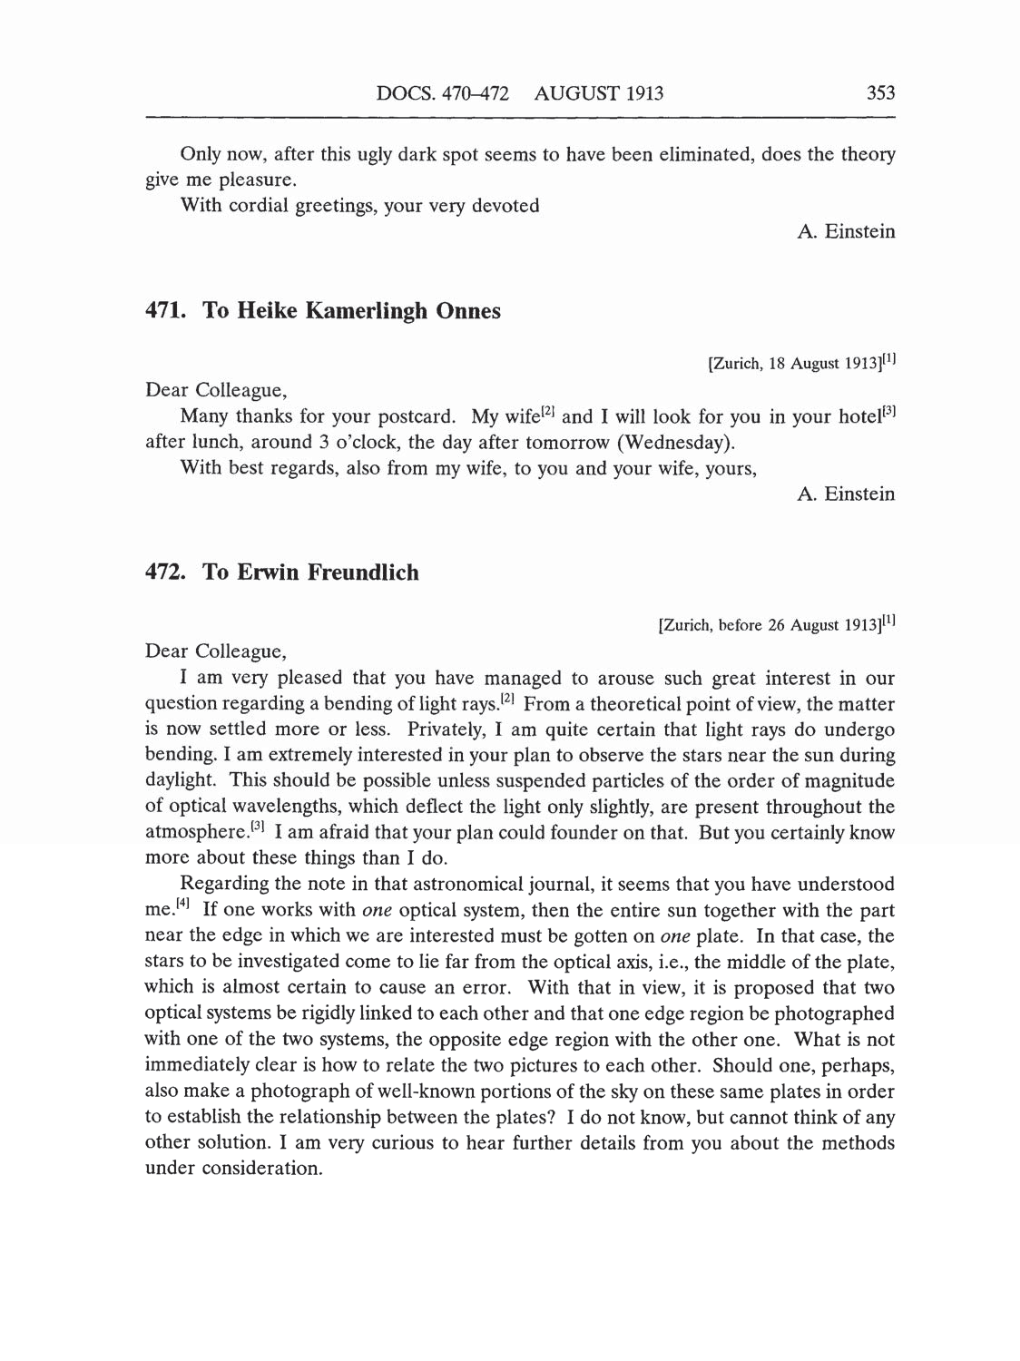 Volume 5: The Swiss Years: Correspondence, 1902-1914 (English translation supplement) page 353